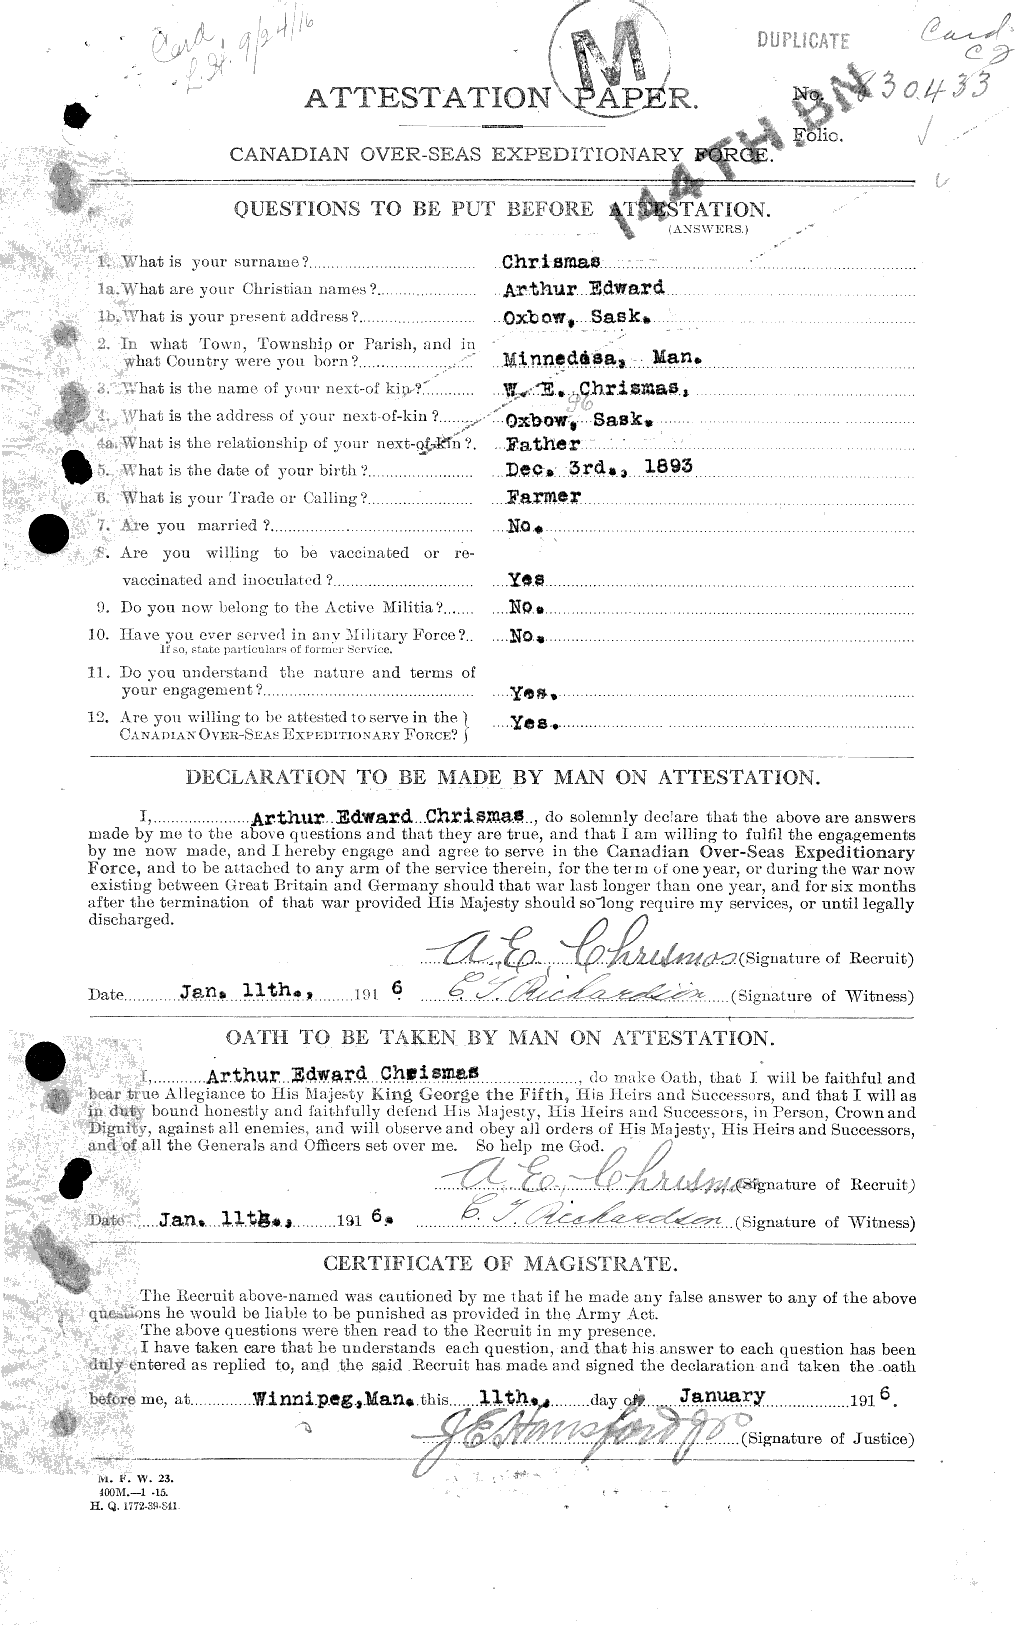 Personnel Records of the First World War - CEF 022137a